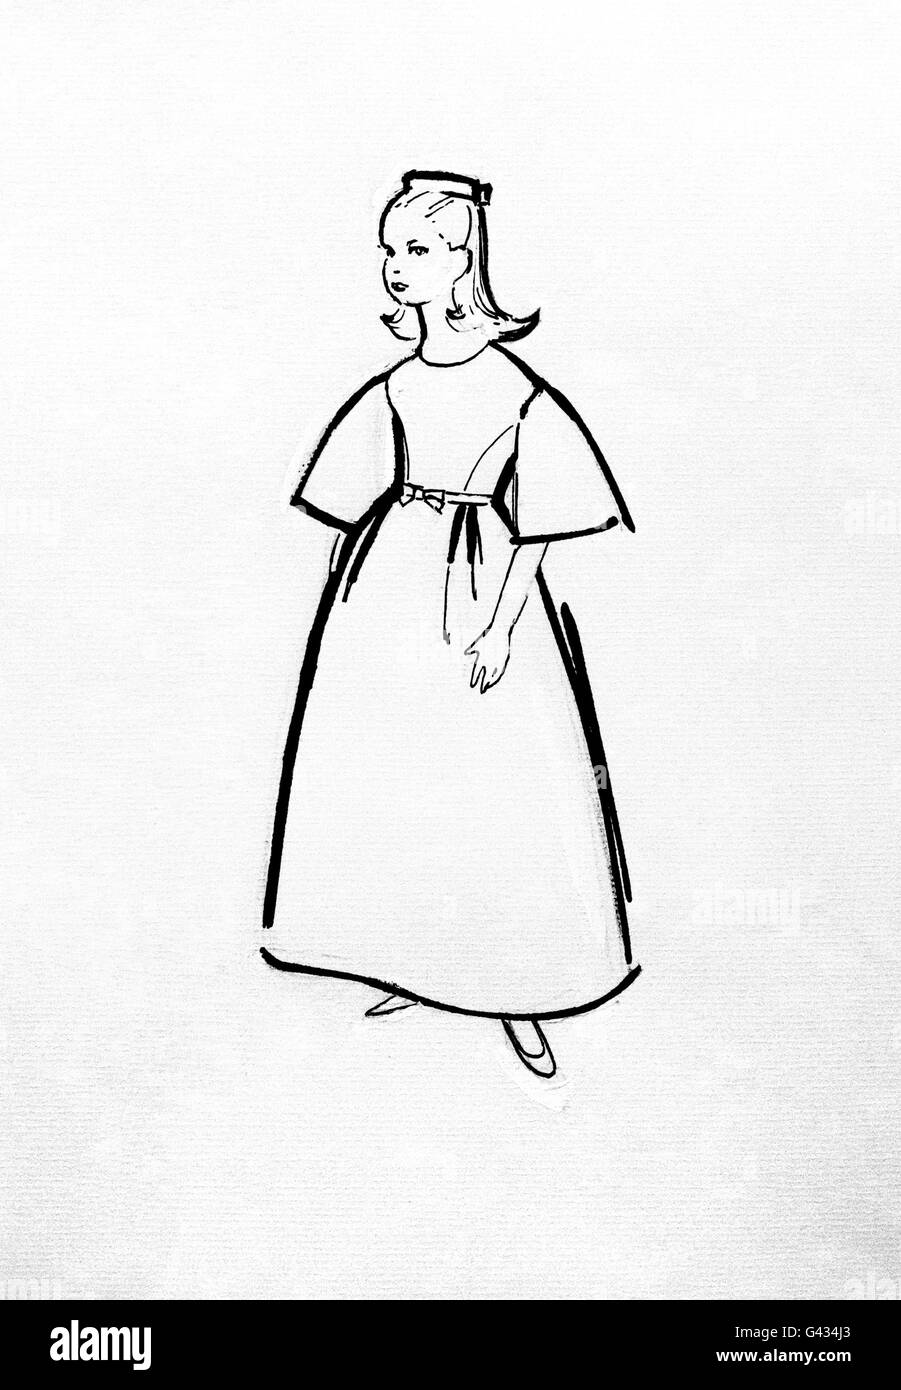 A sketch of one of the bridesmaid's dresses created by John Cavanagh for the wedding of Princess Alexandra and Angus Ogilvy Stock Photo